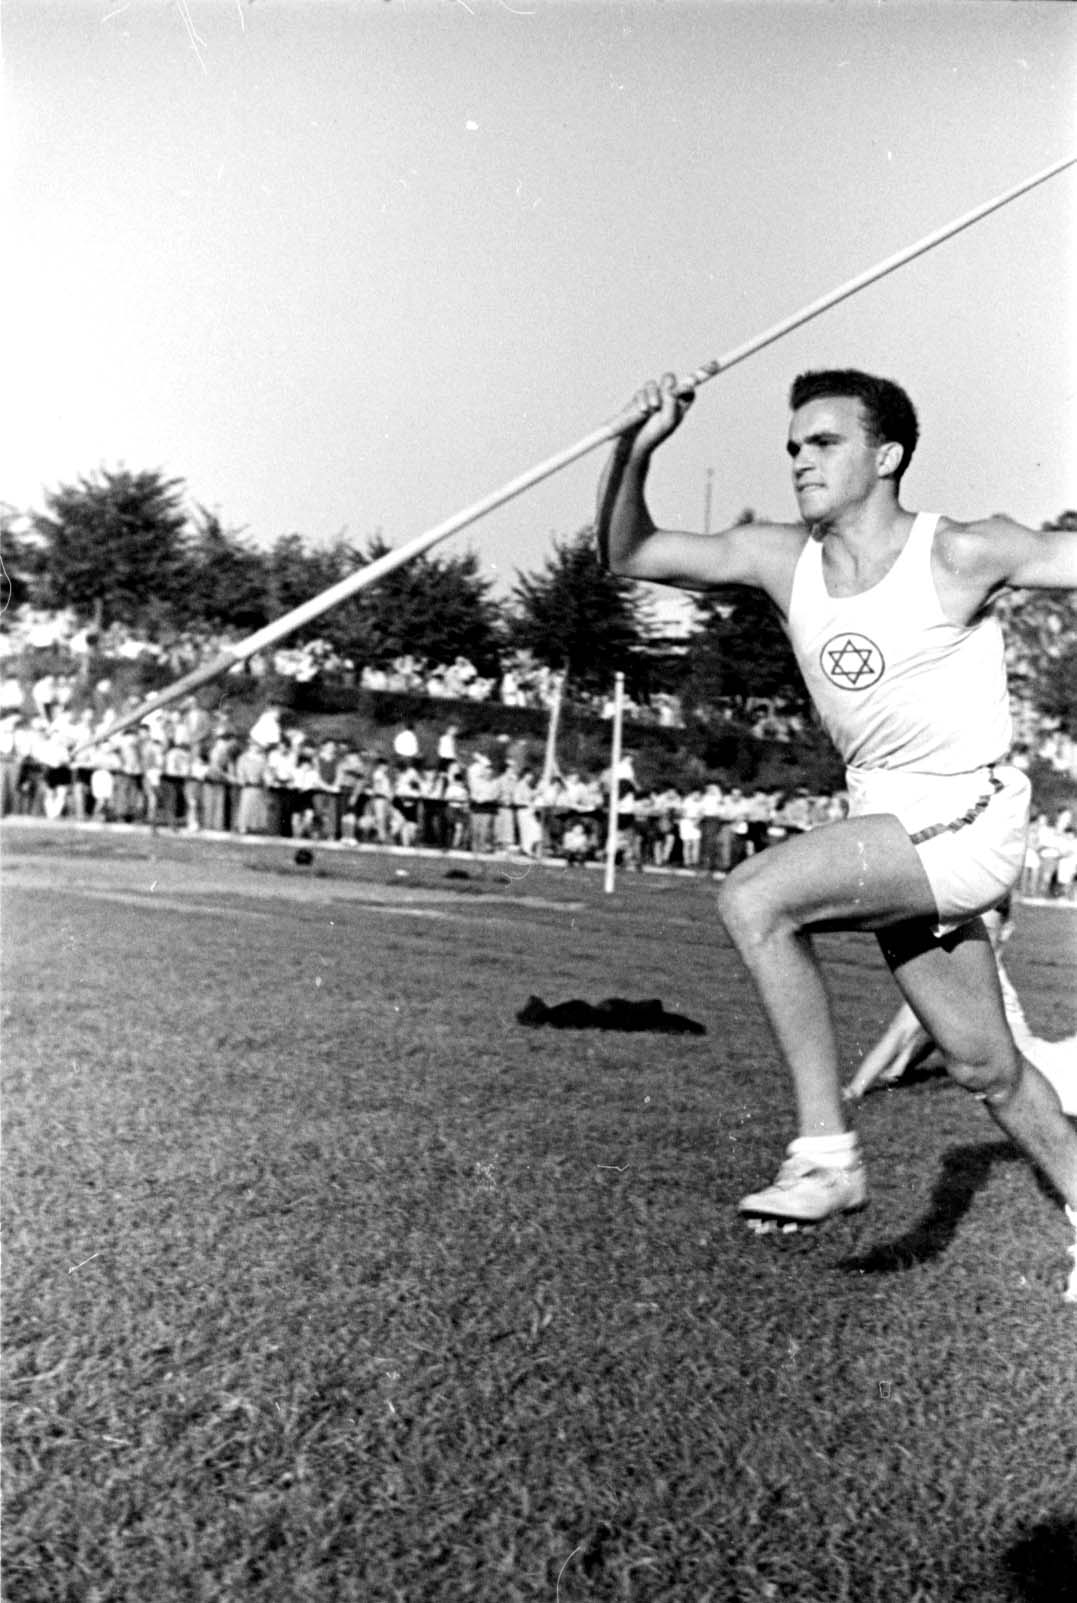 Berlin, Germany, August 1937  A javelin event at a  Maccabi track and field competition